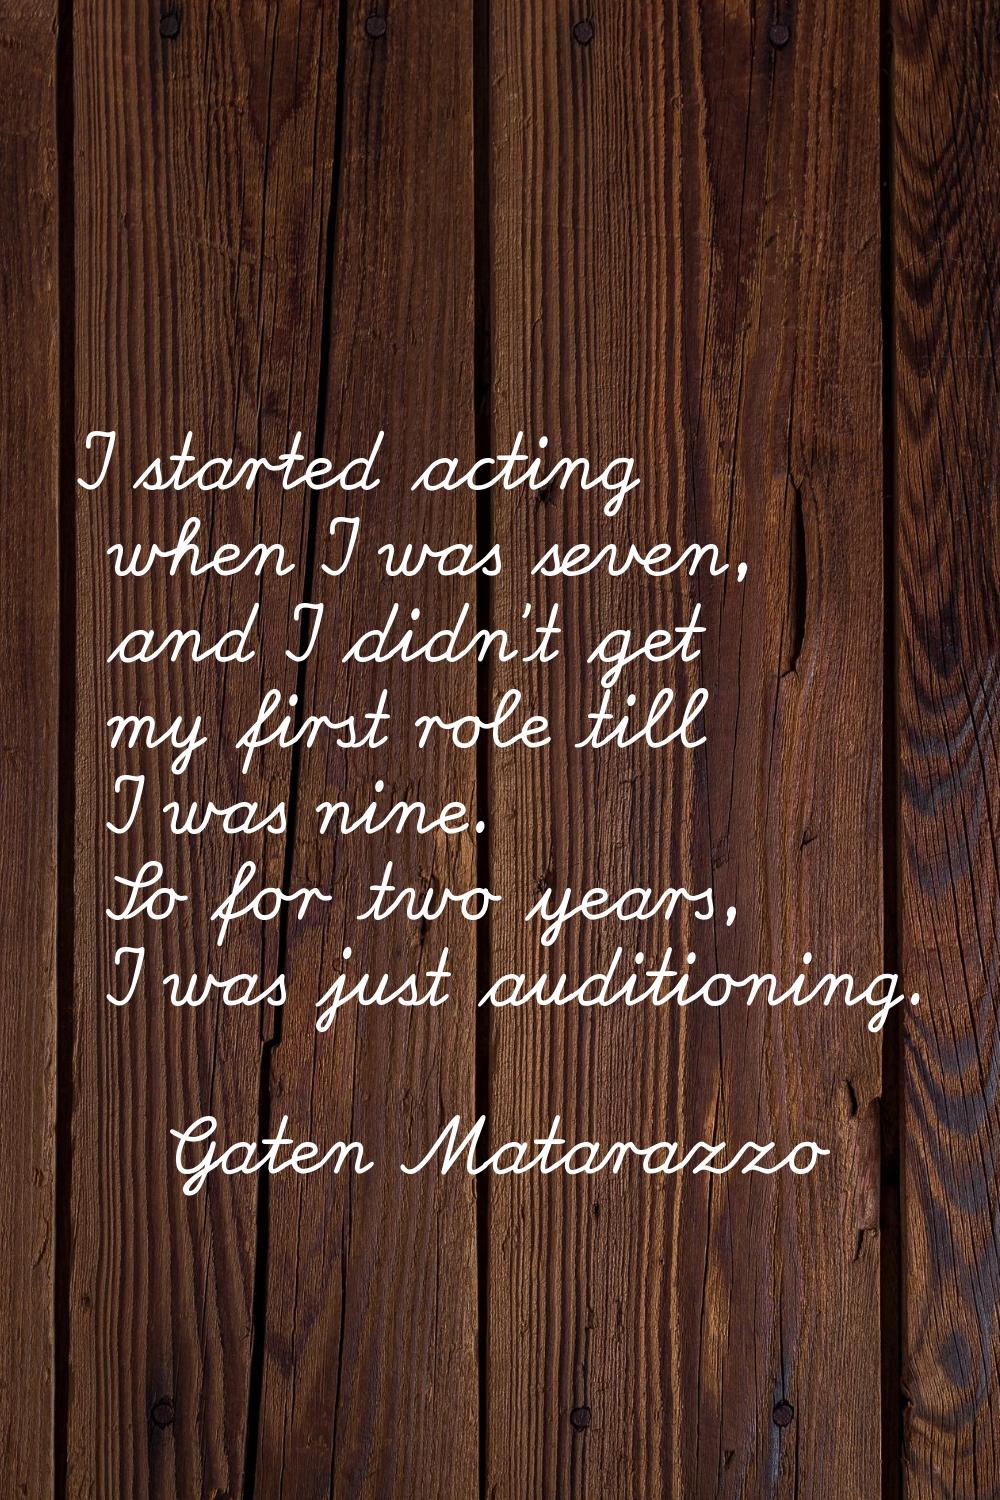 I started acting when I was seven, and I didn't get my first role till I was nine. So for two years